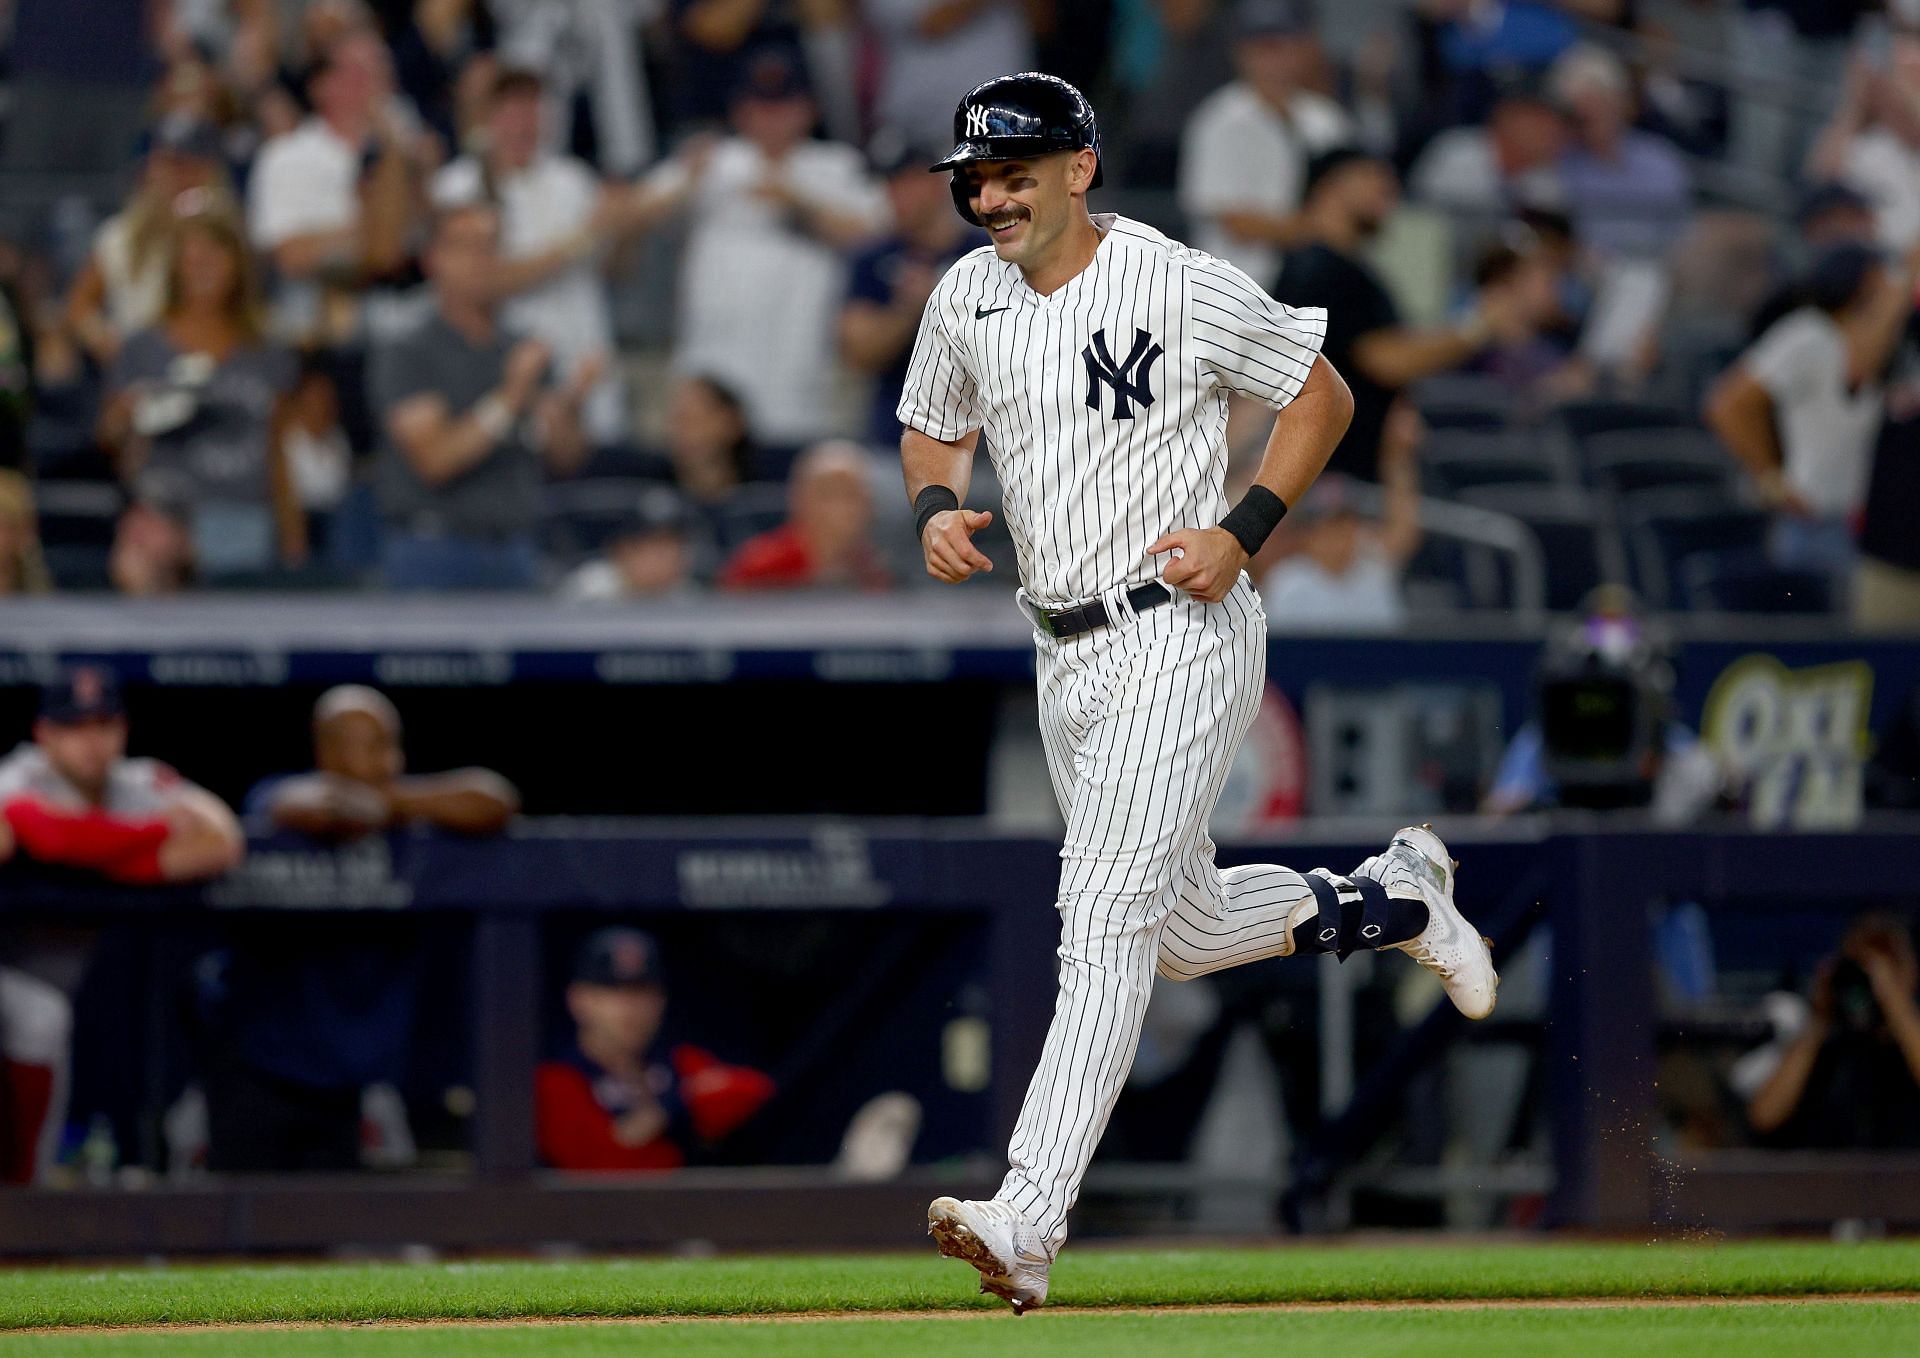 Yankees Social Media: Carpenter is thrilled to be in a Yankees